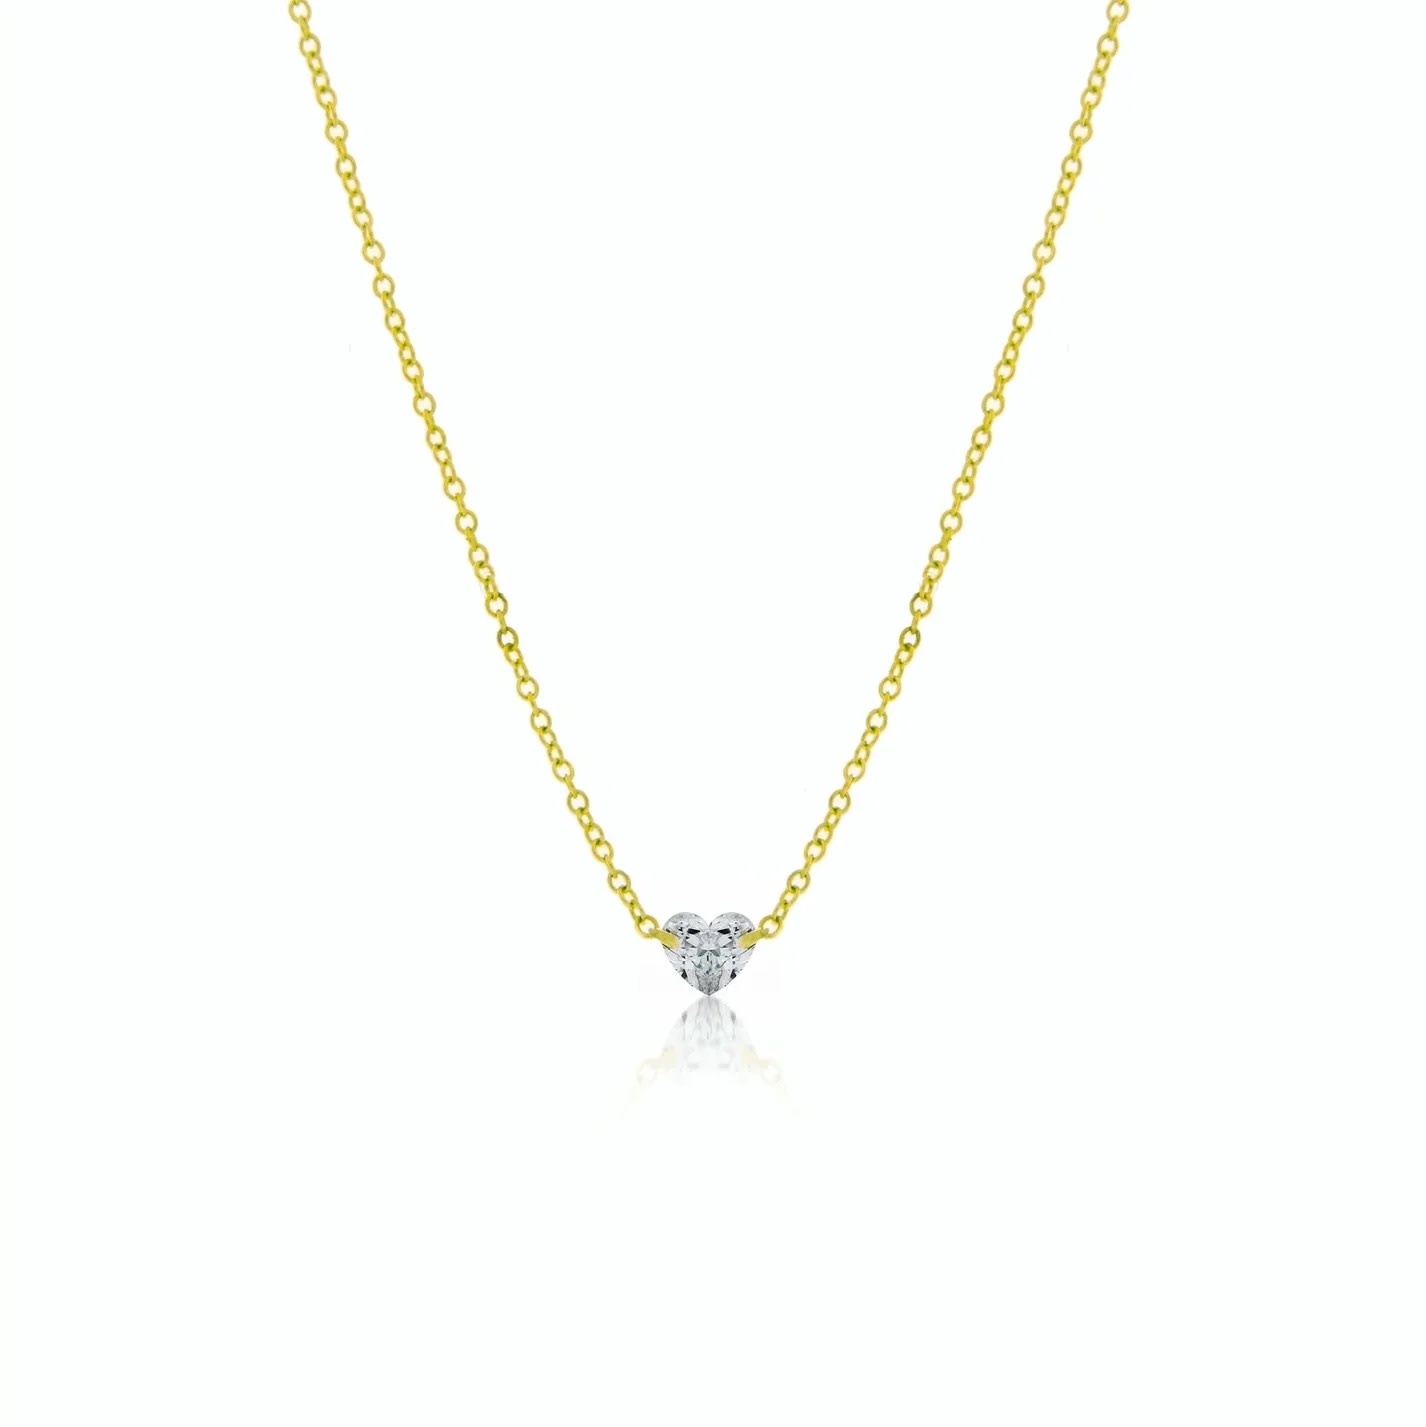 Drilled Heart Diamond Necklace | Meira T - Freedman Jewelers